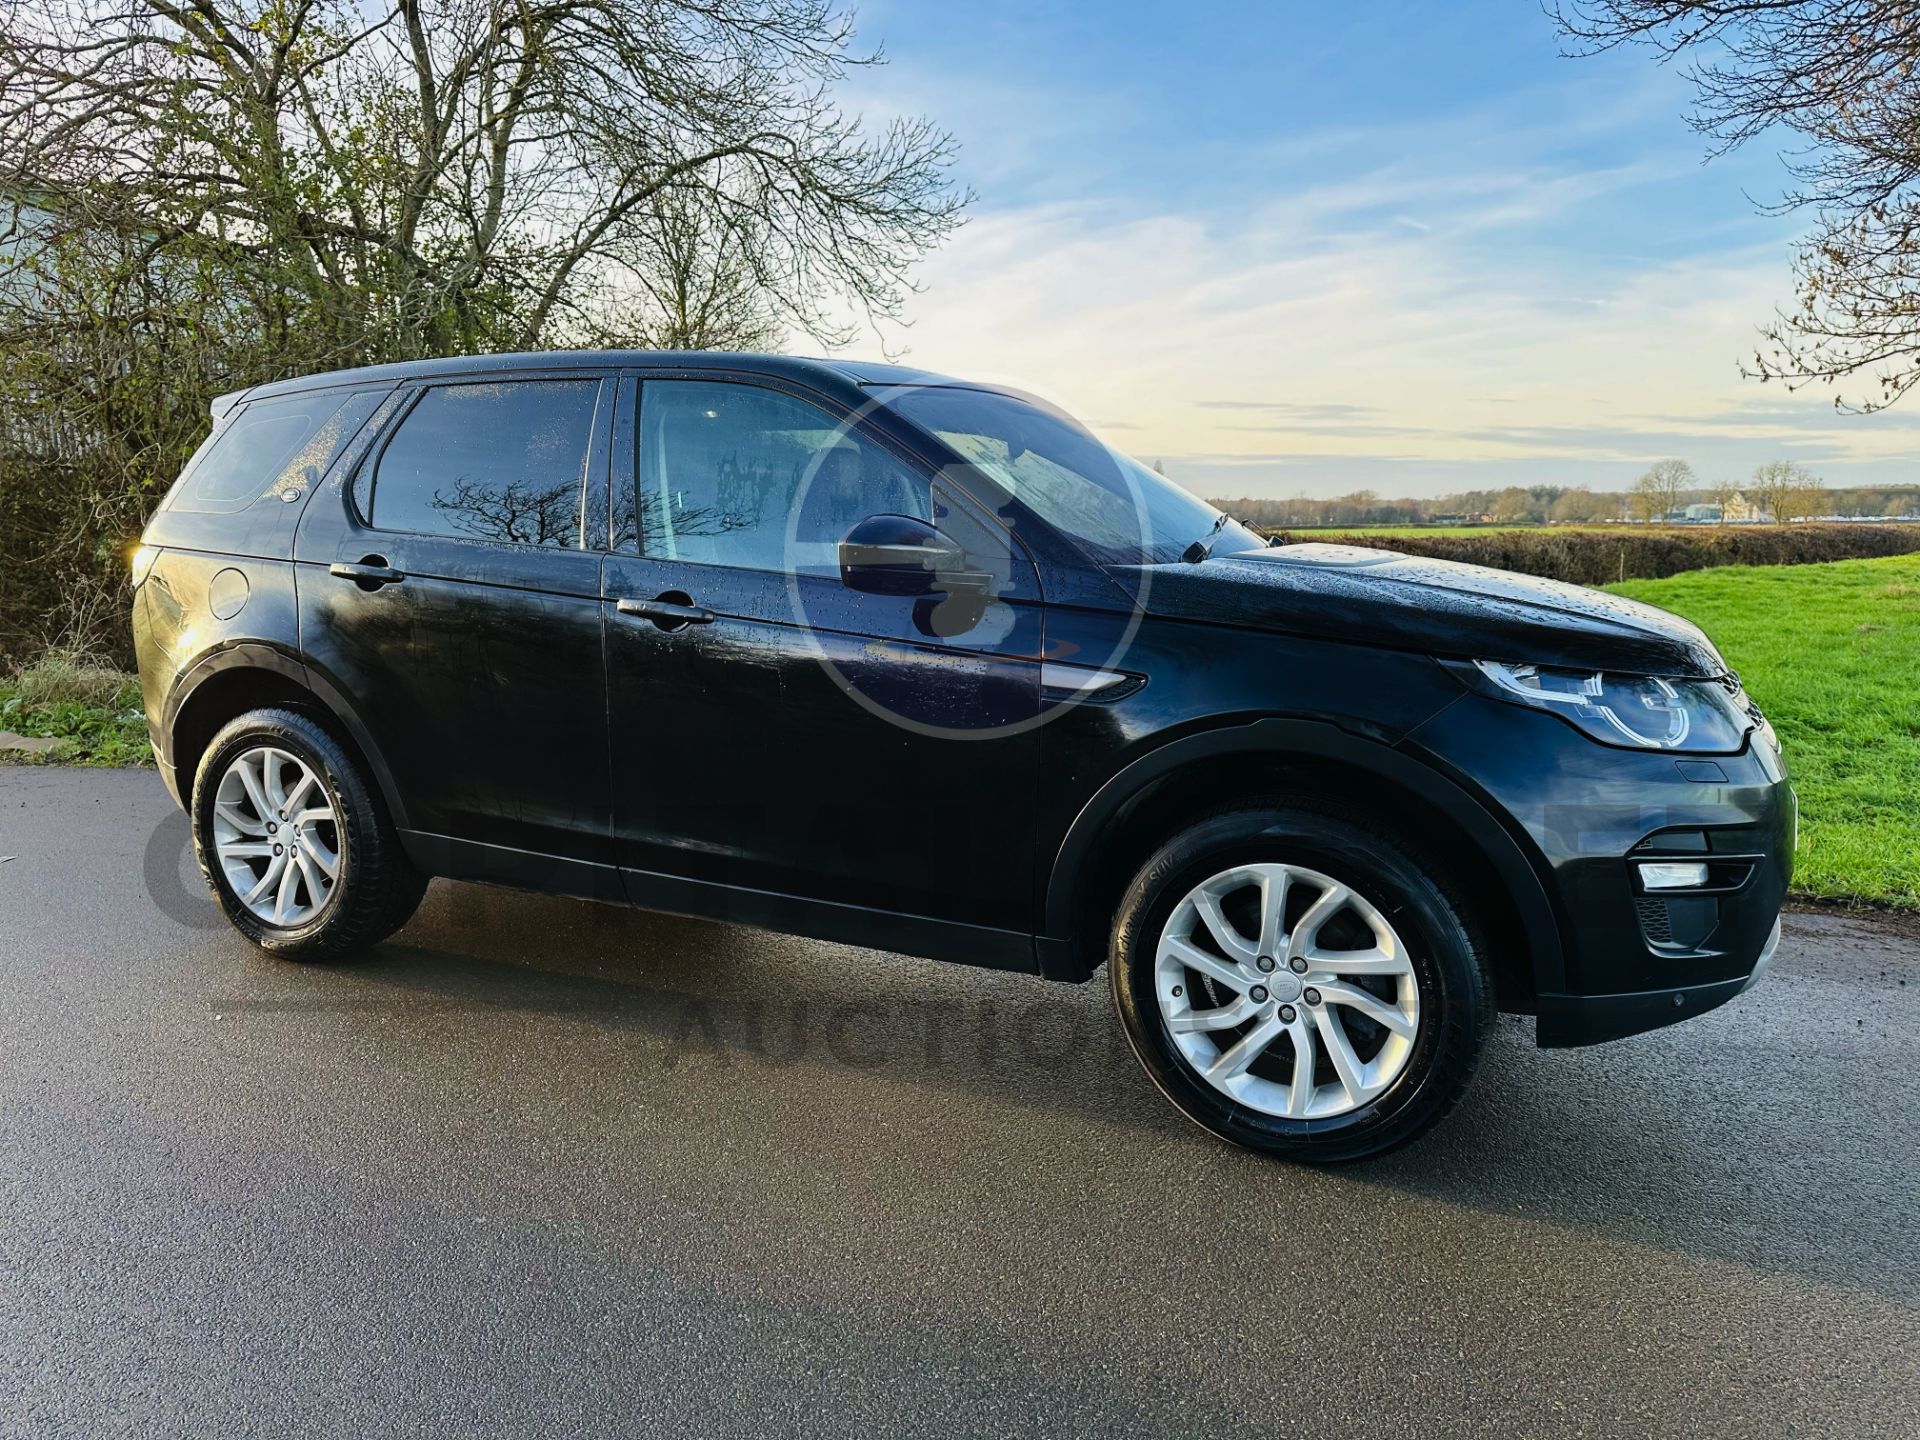 (On Sale) LAND ROVER DISCOVERY SPORT *SE EDITION* (2017 MODEL) - 7 SEATER - AIR CON - EURO 6